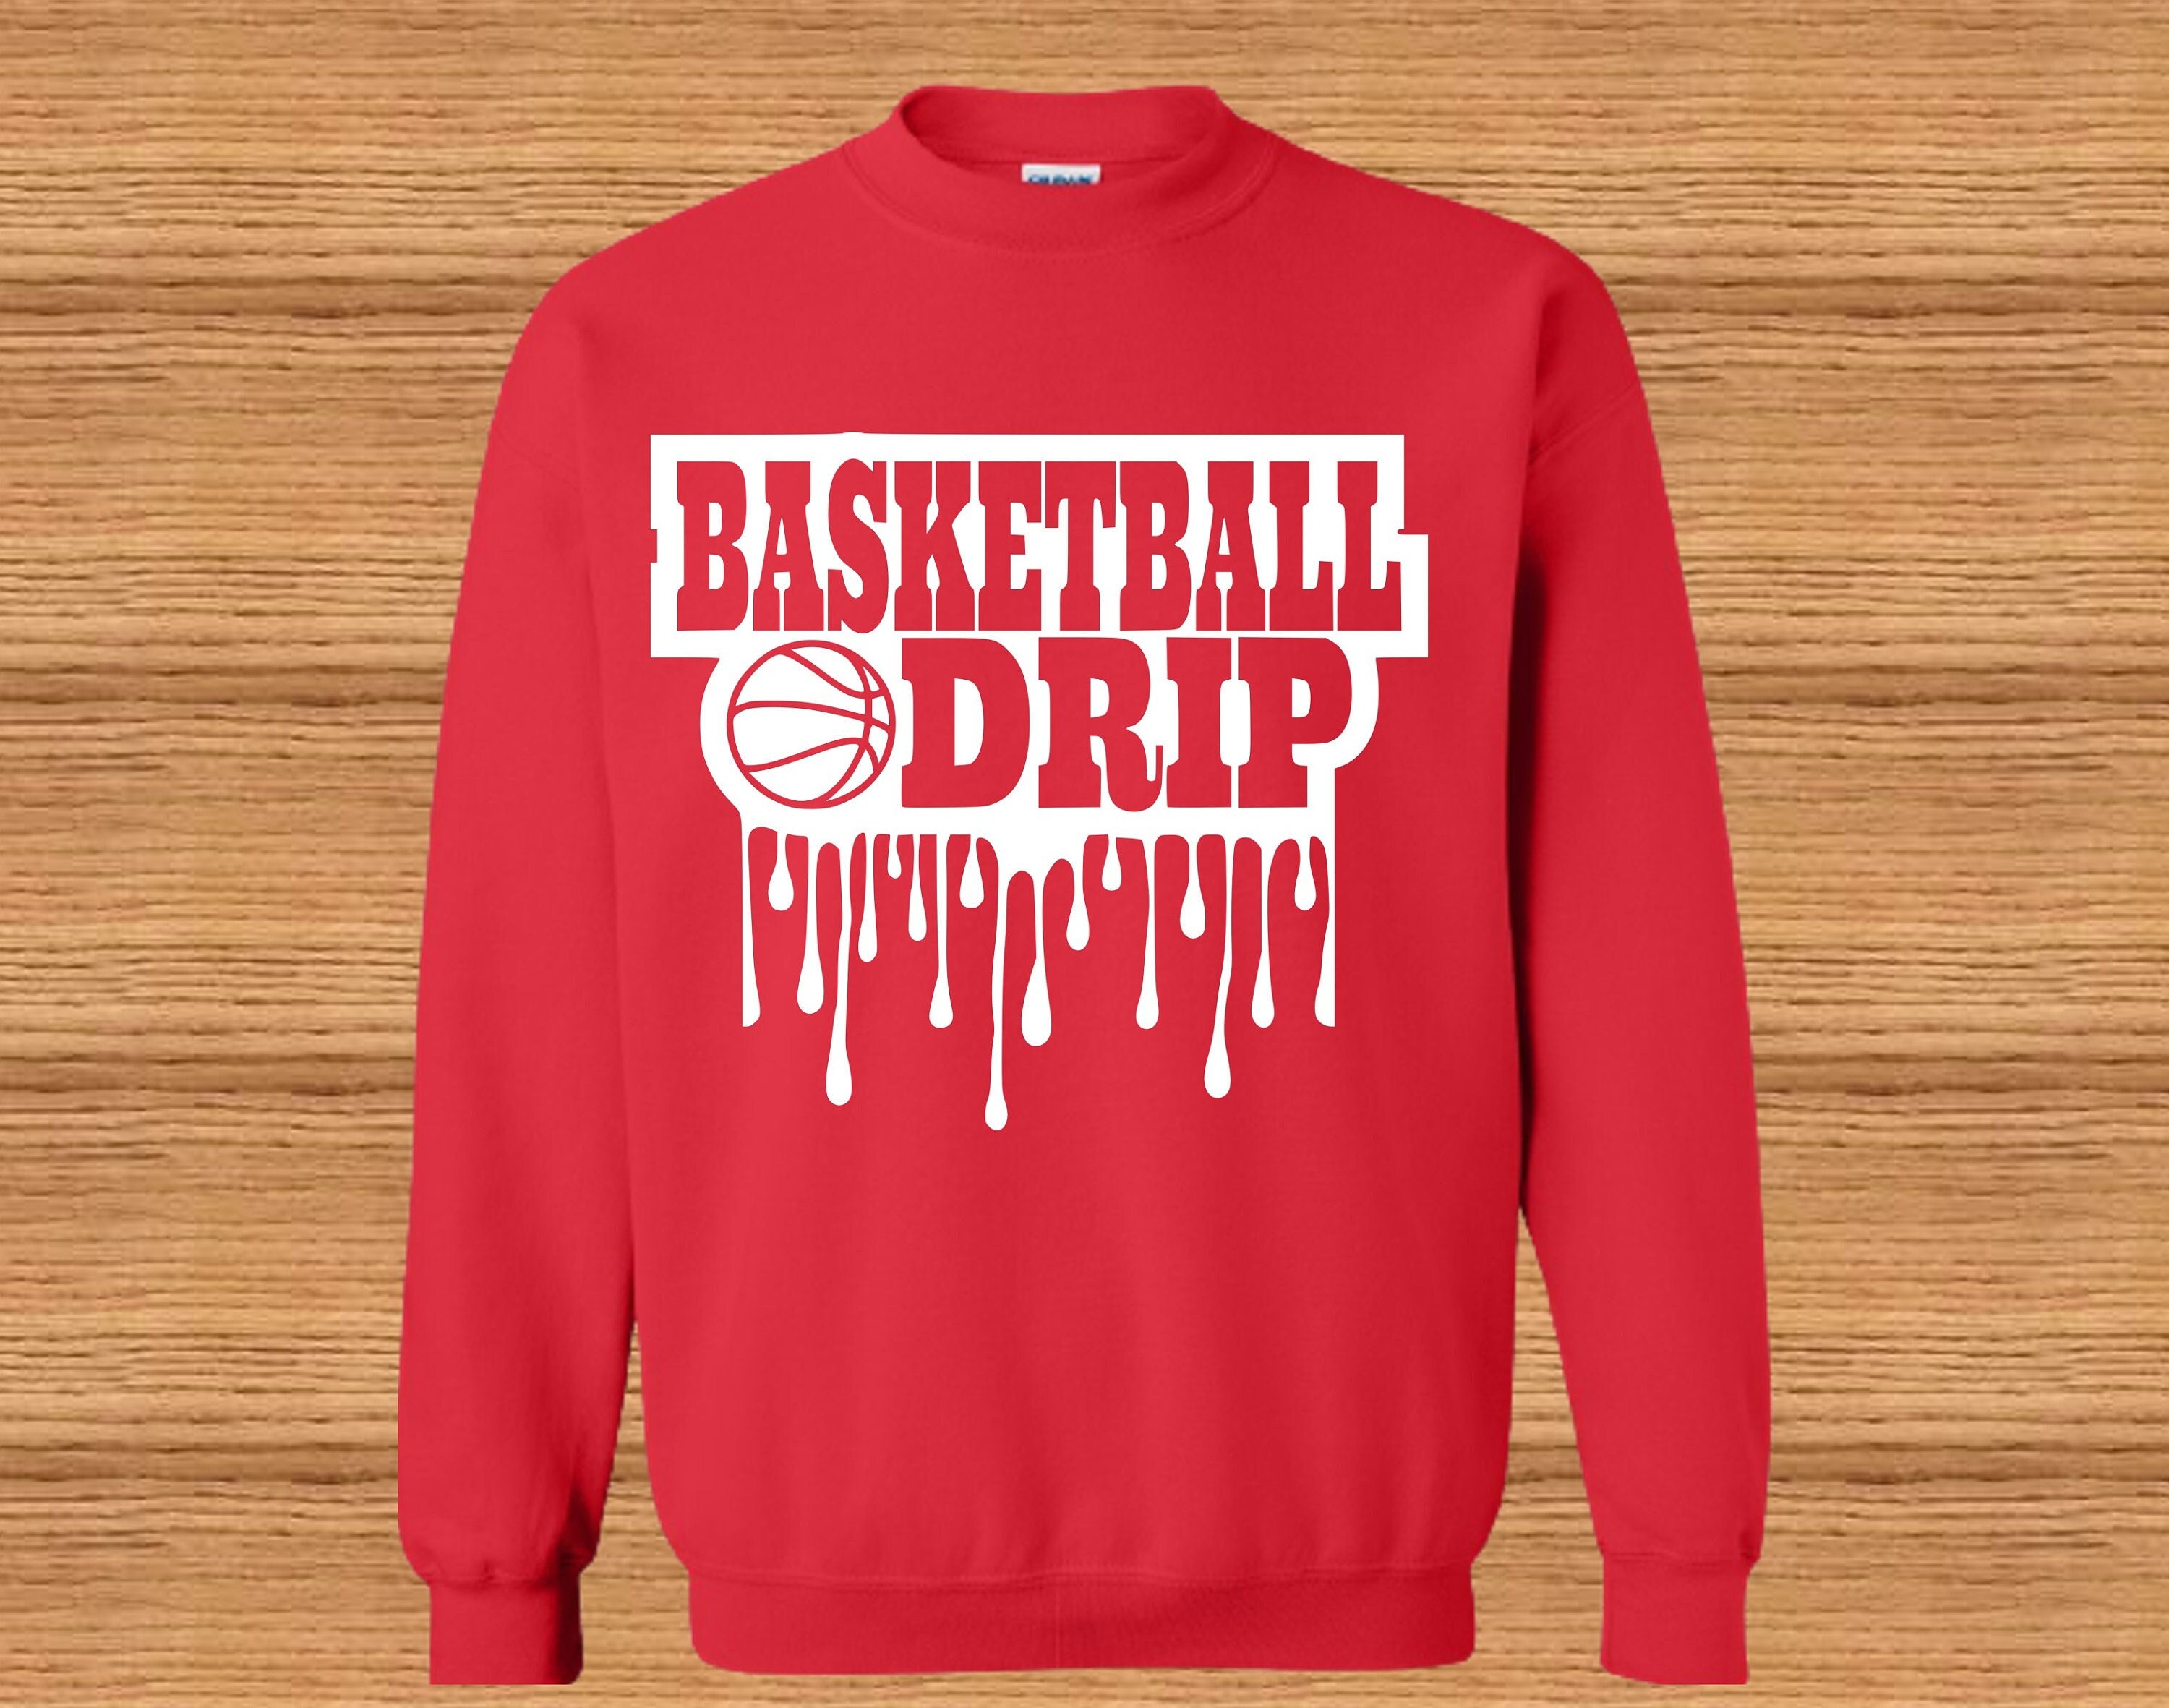 drippy basketball fit